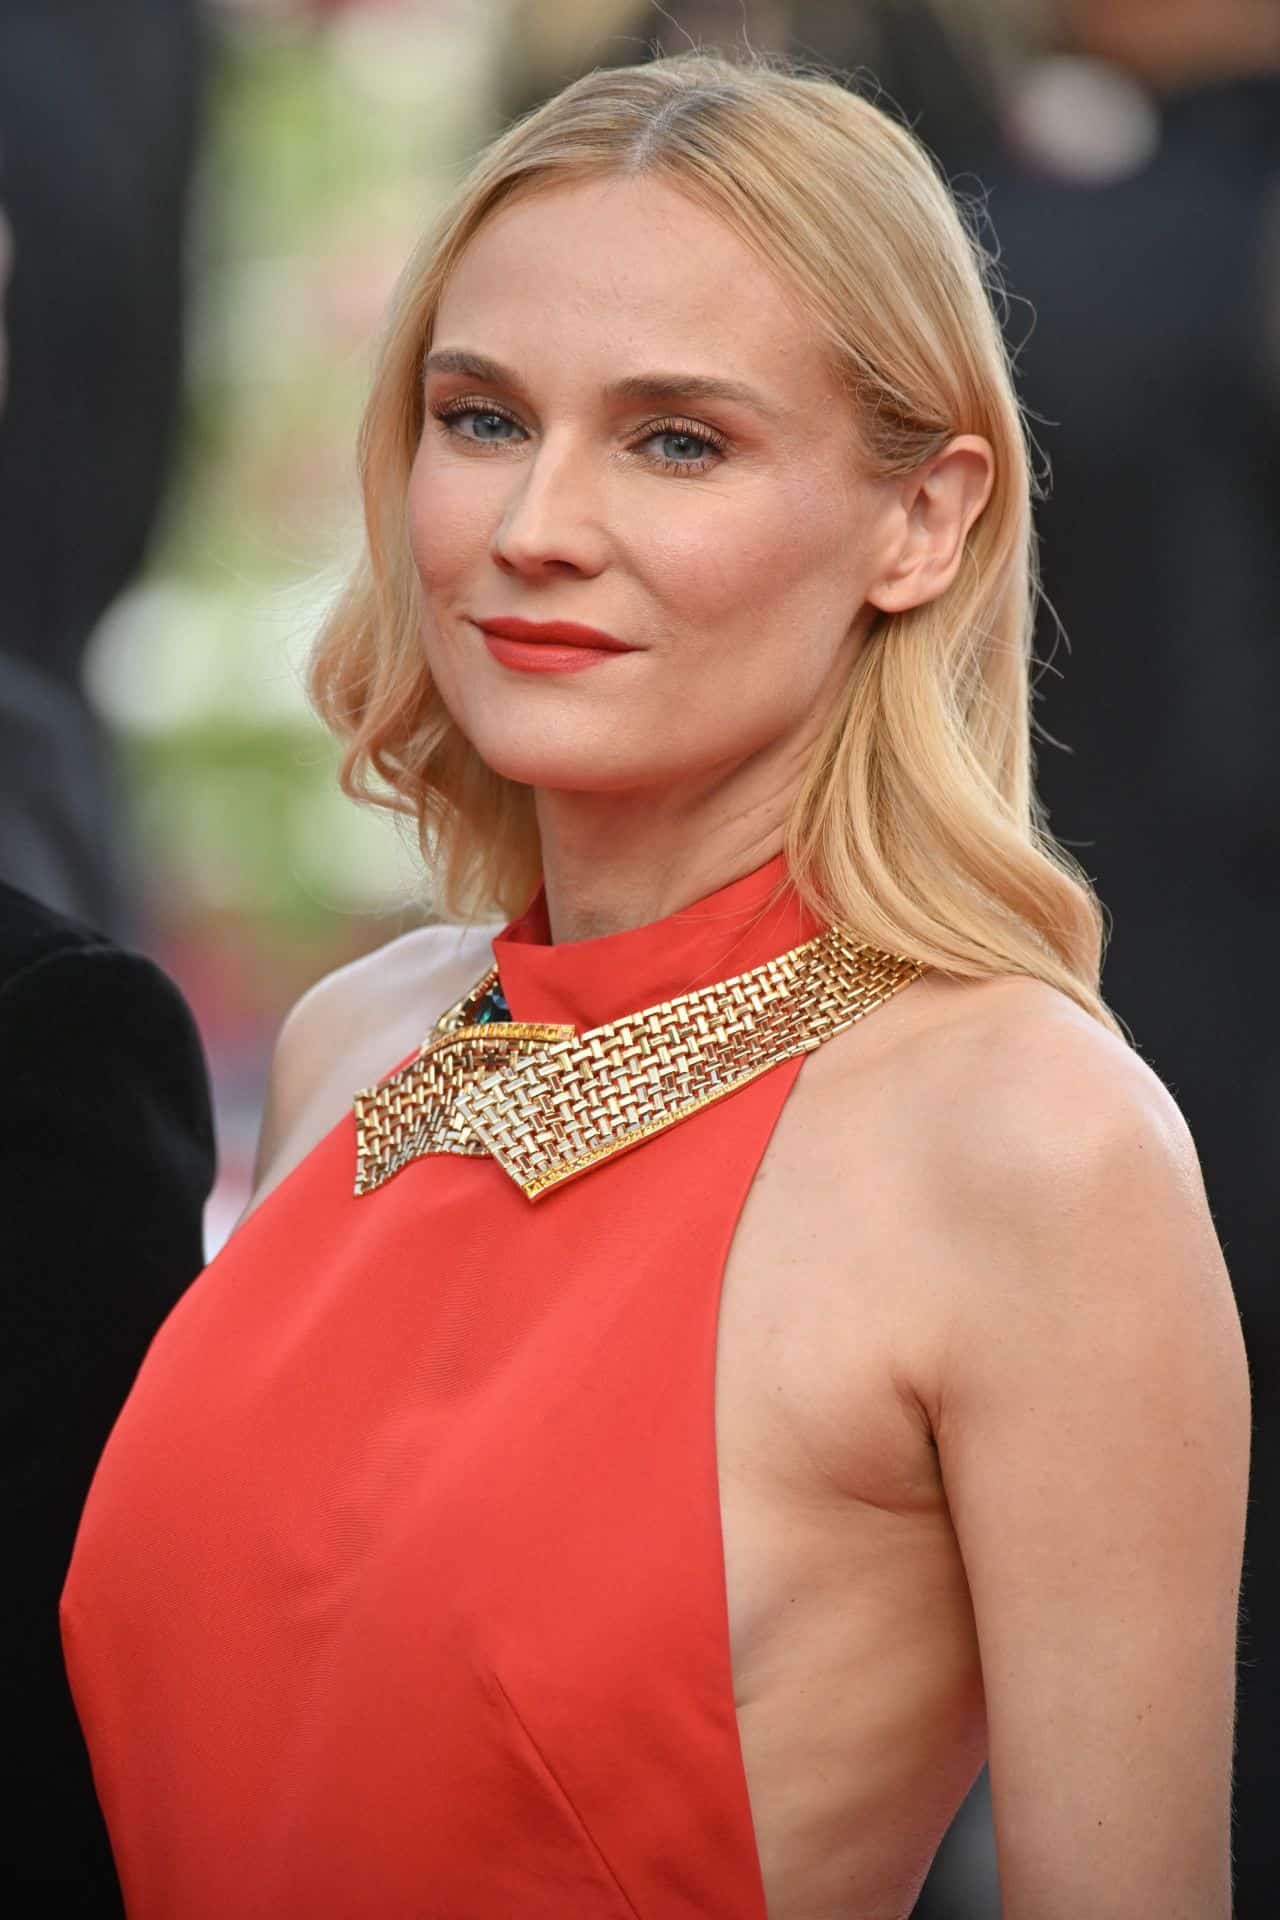 Diane Kruger Oozes Glamour in Red Gown at the 2022 Cannes Film Festival